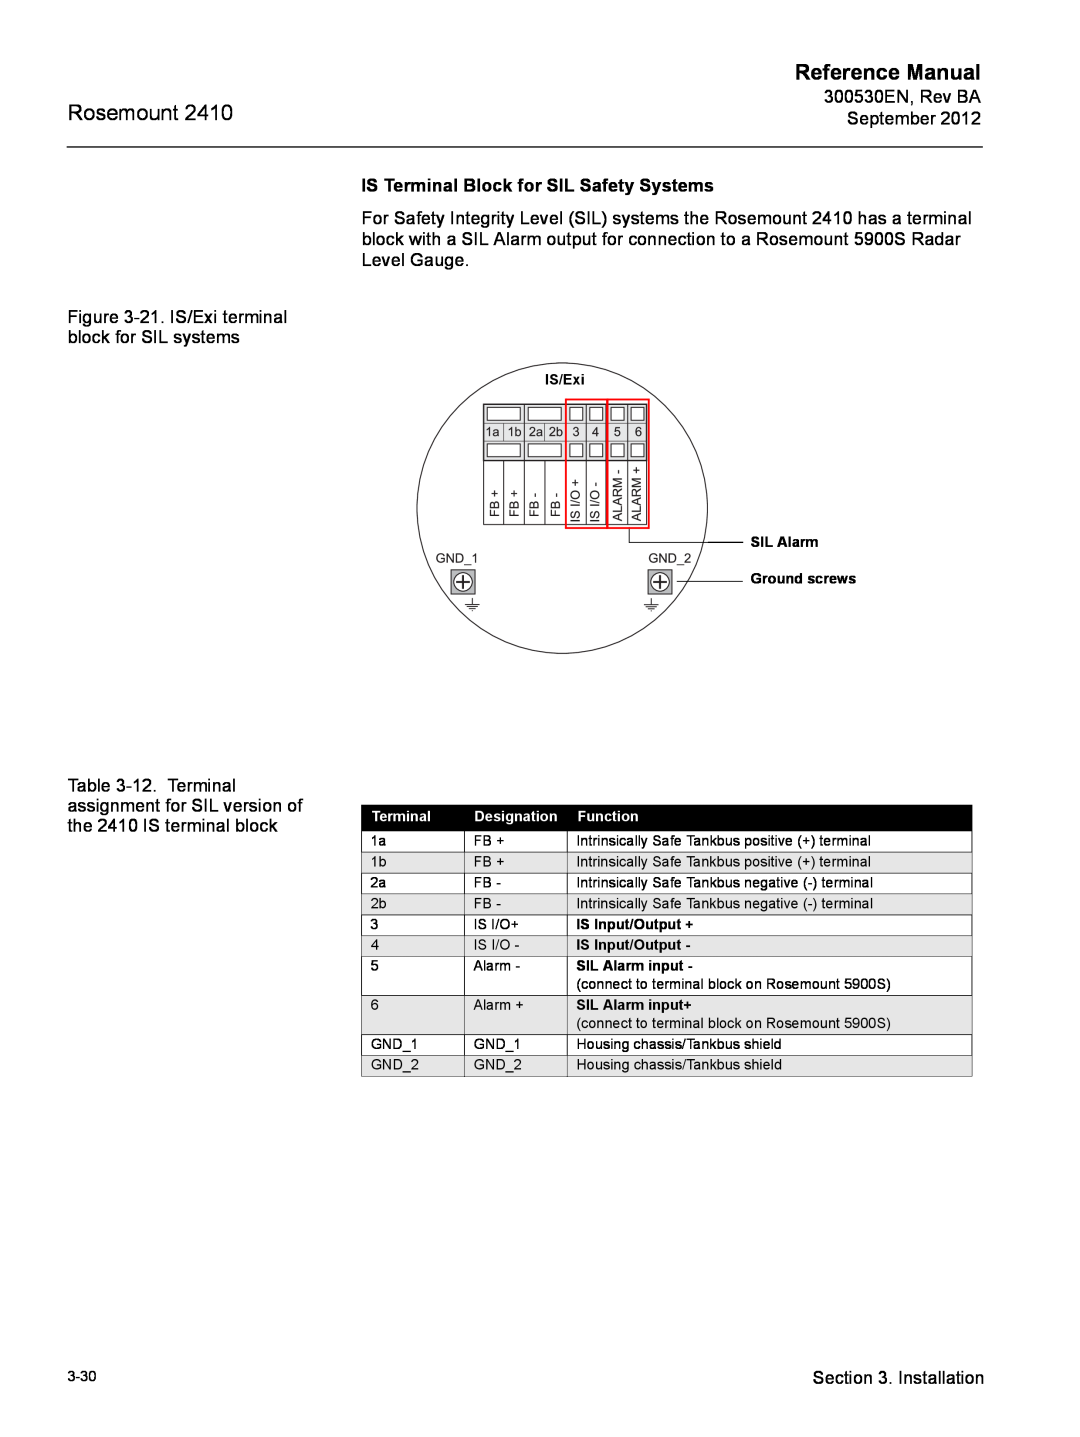 Emerson Process Management Rosemount 2410 manual IS Terminal Block for SIL Safety Systems, Reference Manual 